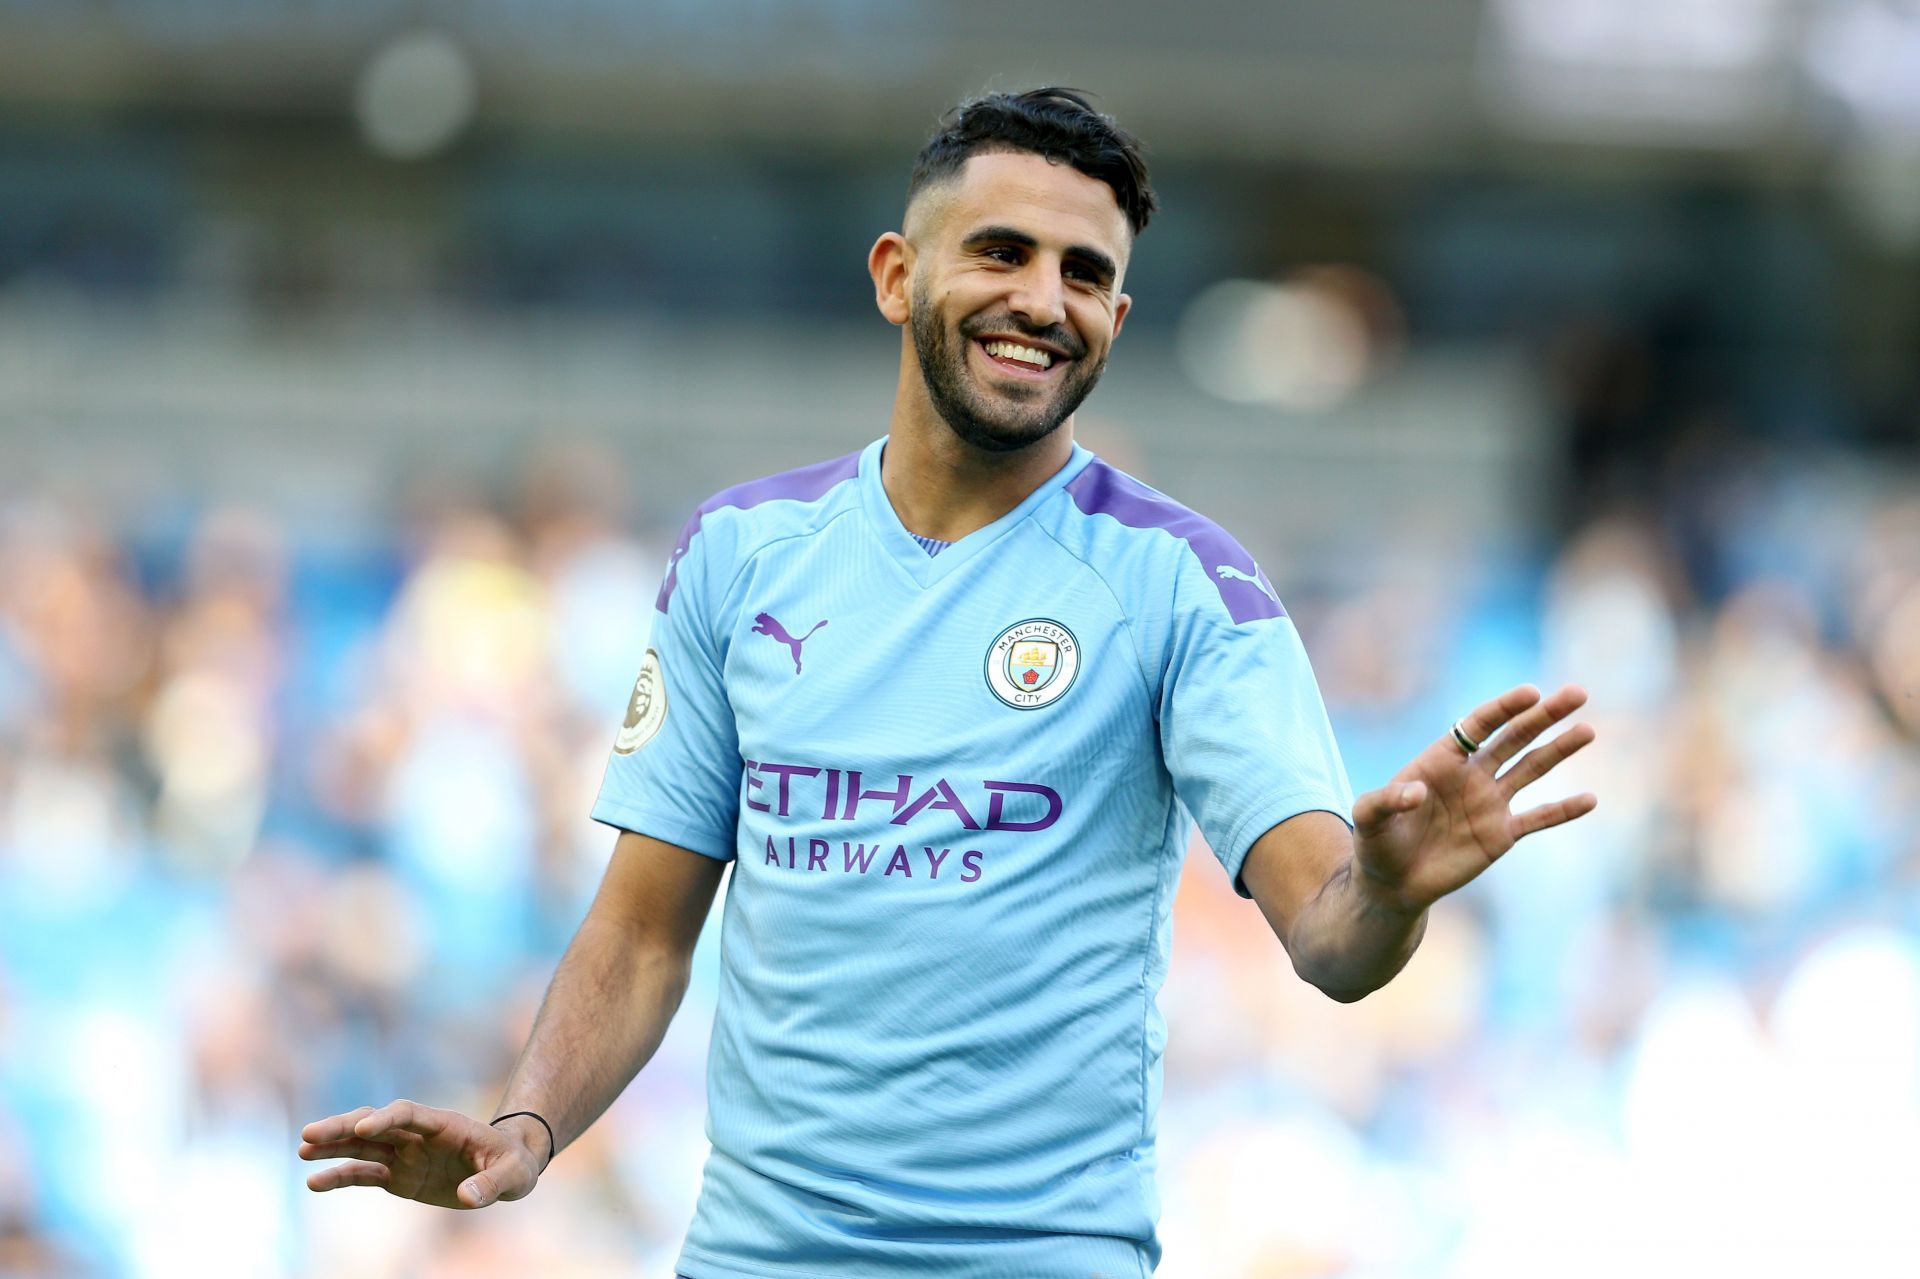 Mahrez came into his own in the second half